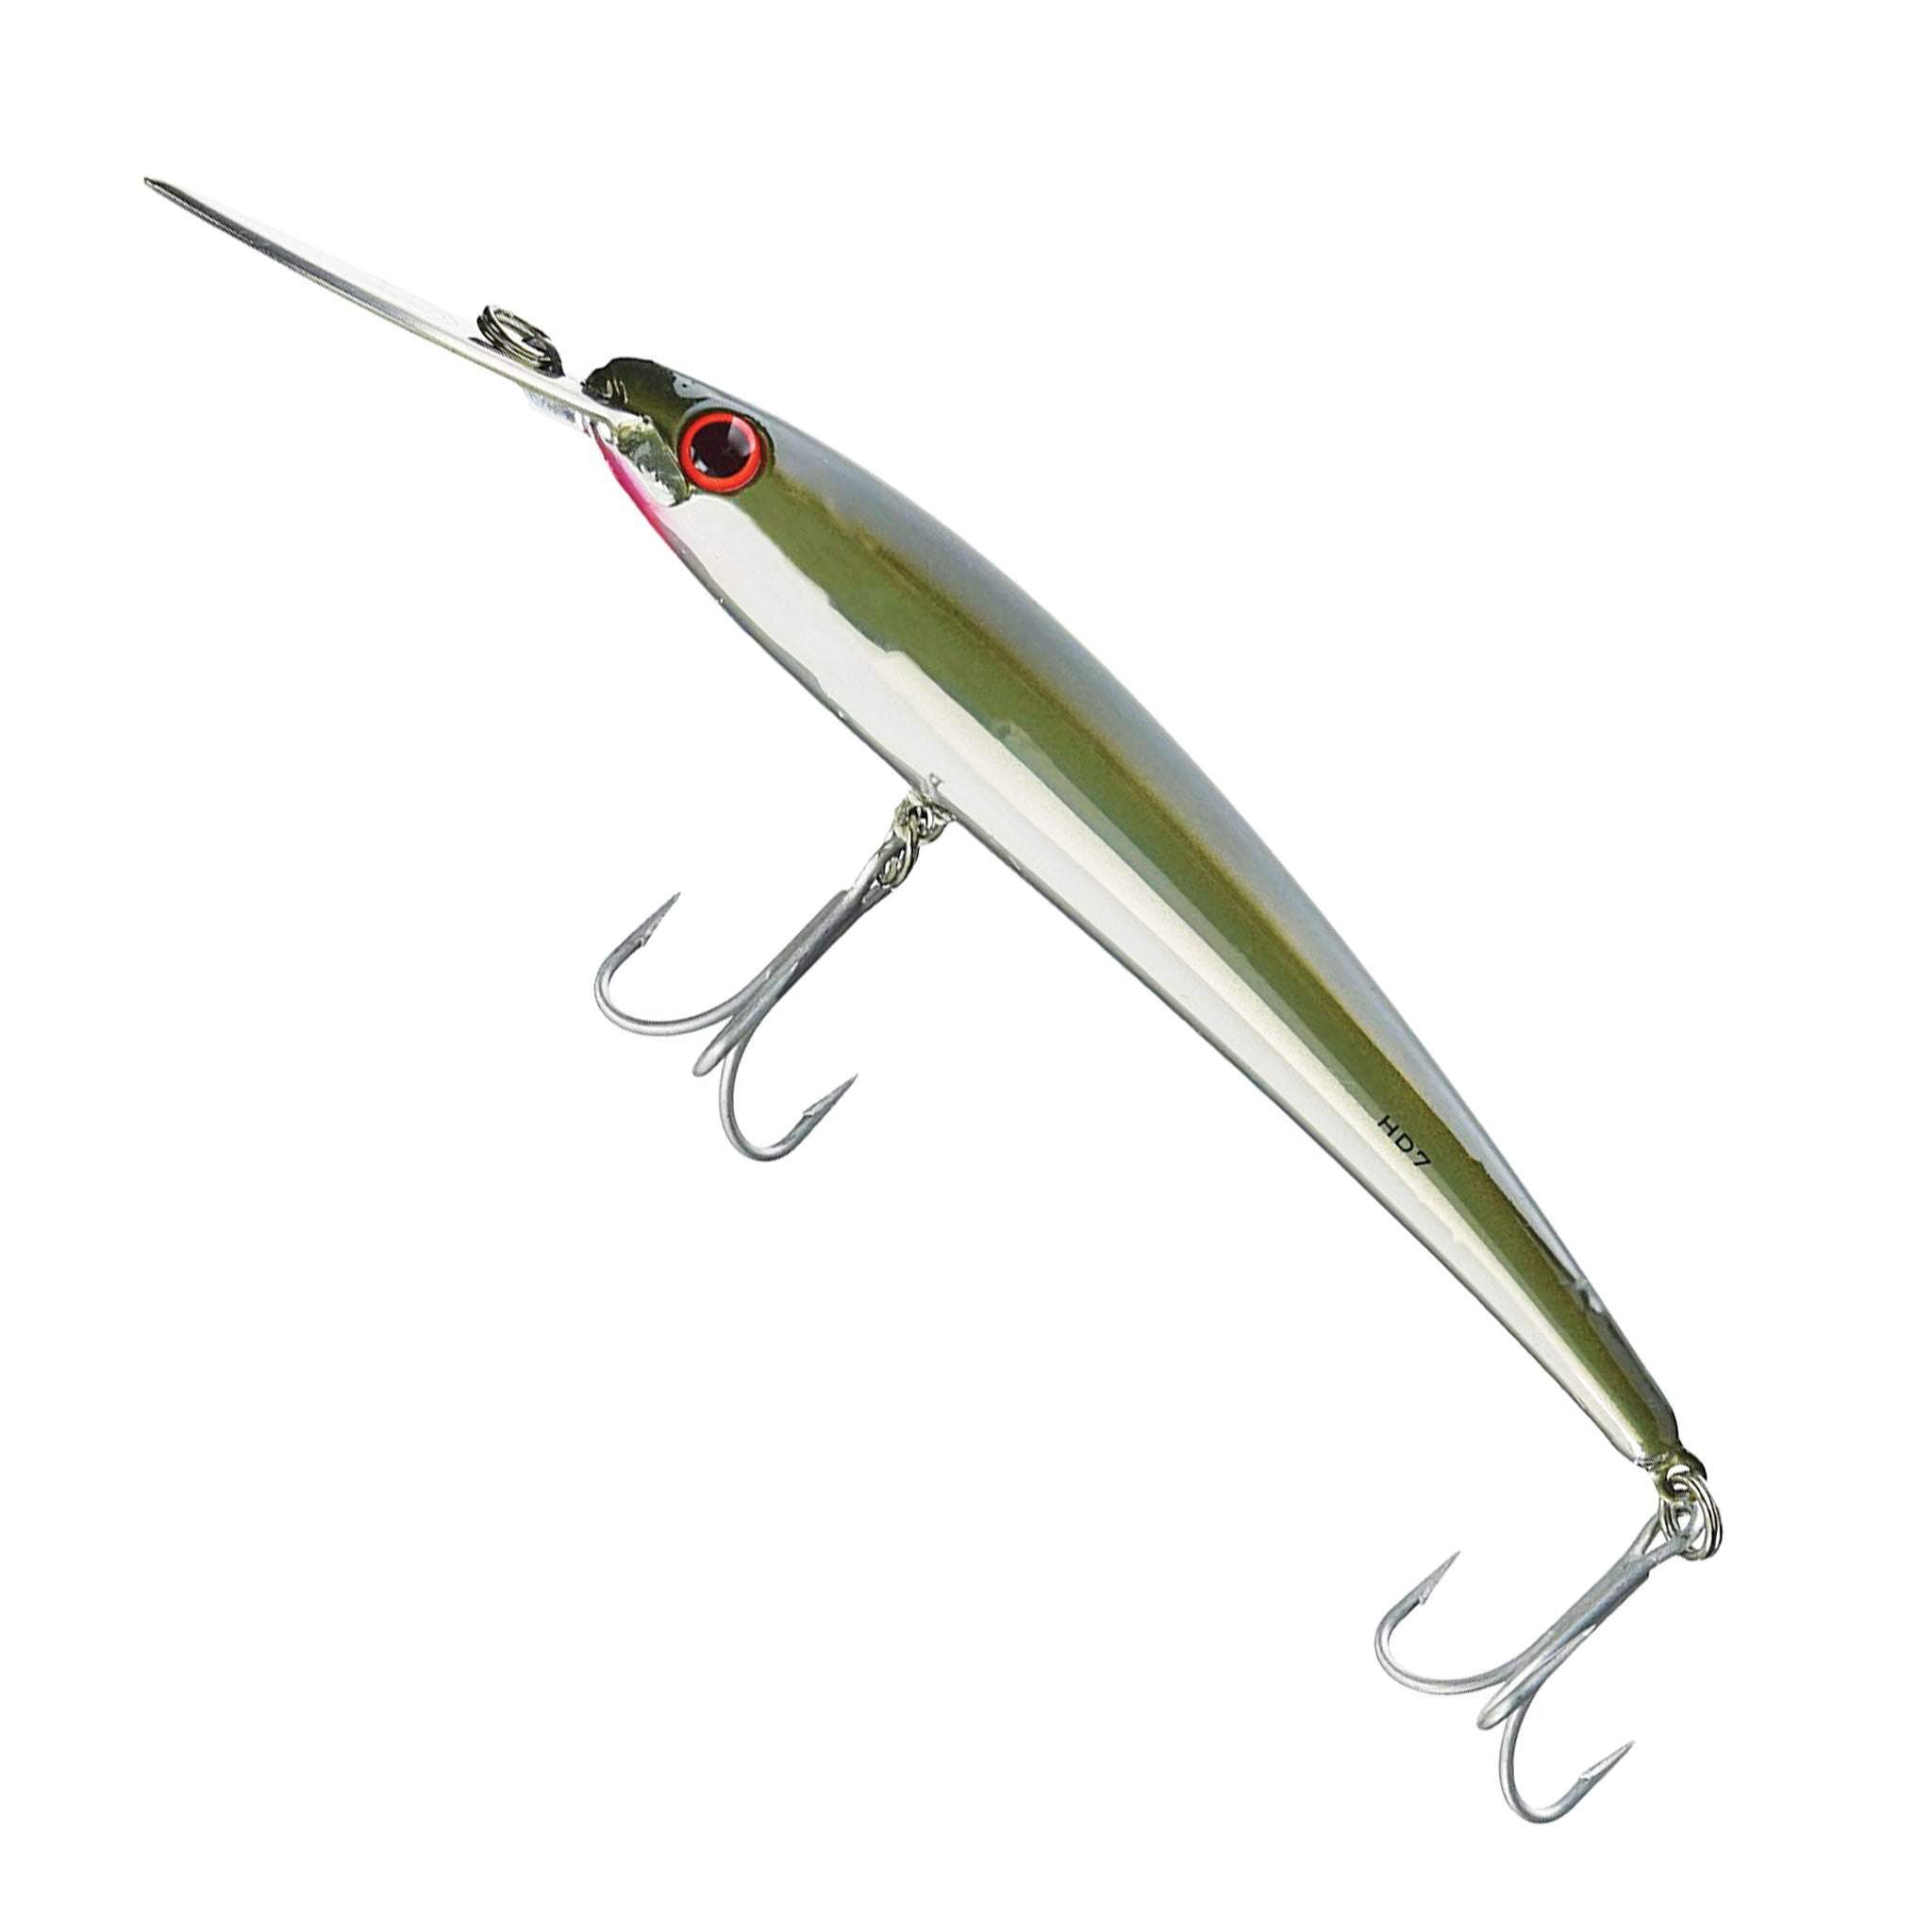 Bomber Lures Mullet Slow-Sinking Twitch/Walking Saltwater Fishing Lure -  Excellent for Speckled Trout, Redfish, Stripers and More, 3 1/2 Inch, 5/8